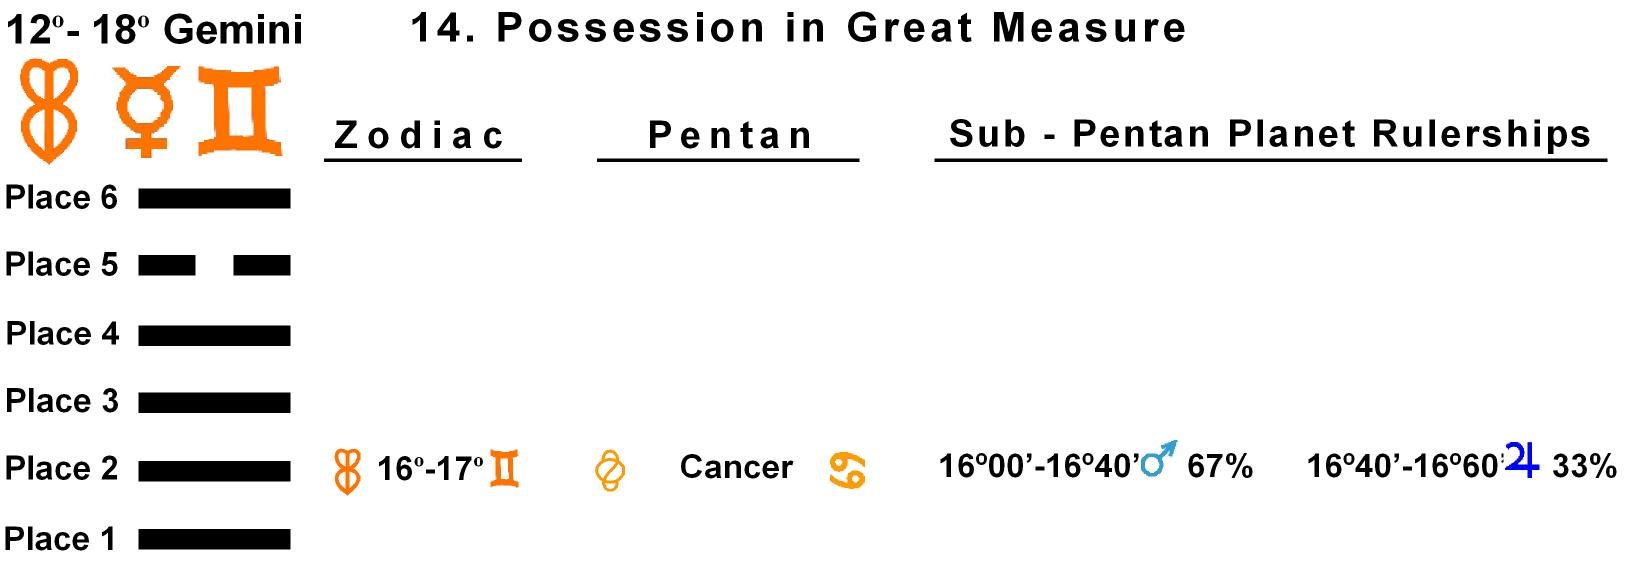 Pent-lines-03GE 16-17 Hx-14 Possession In Great Measure